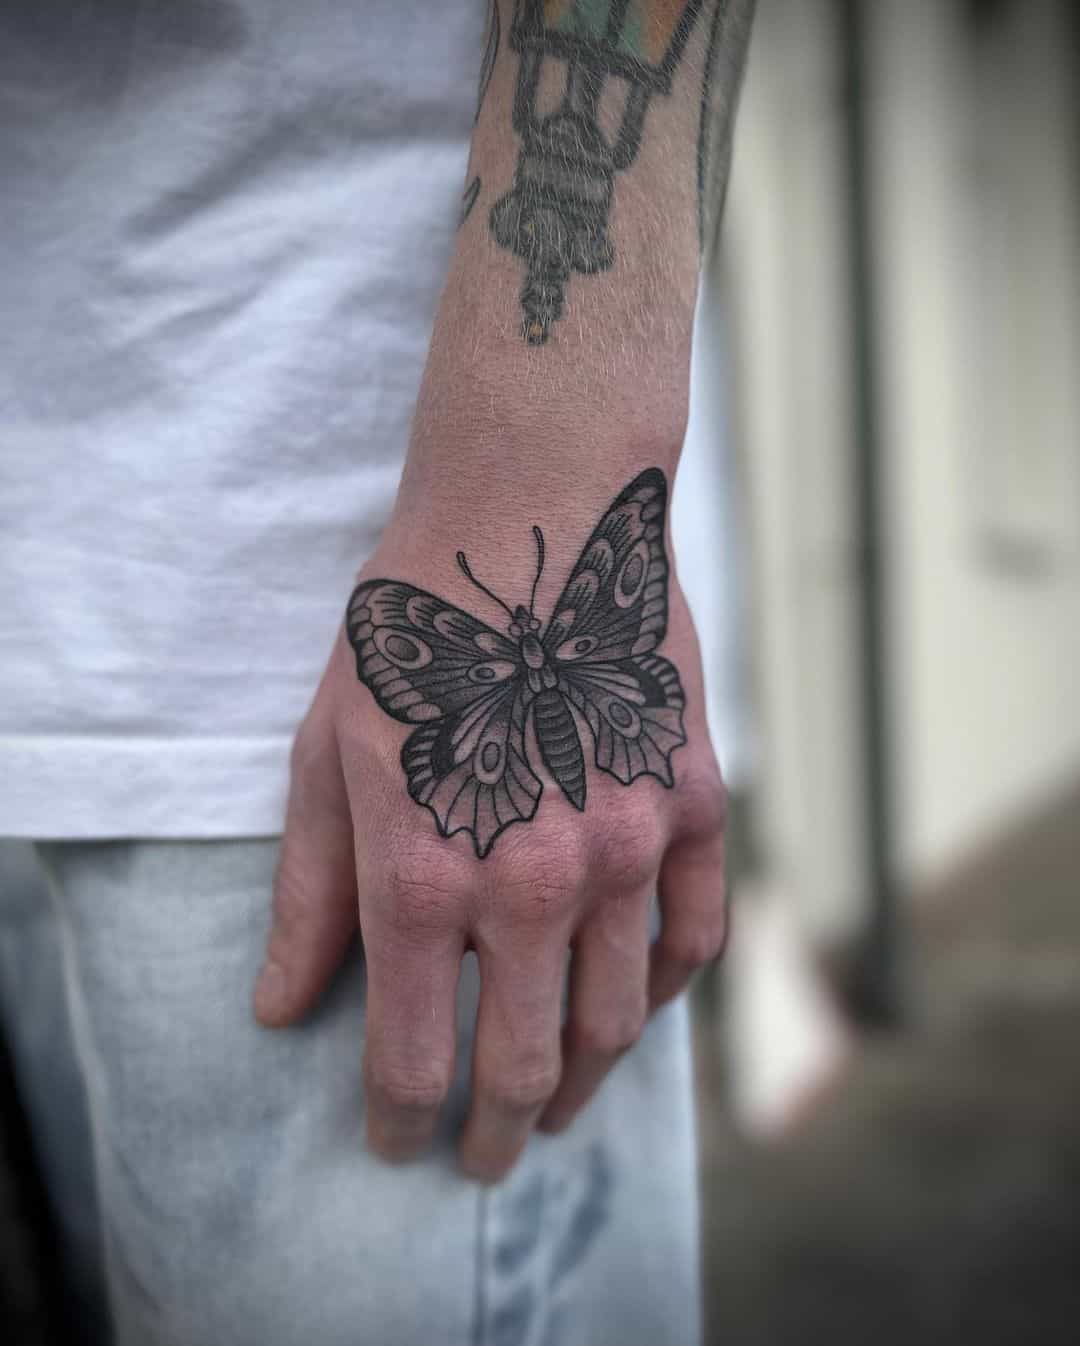 Butterfly on hand tattoo by snacklord3000